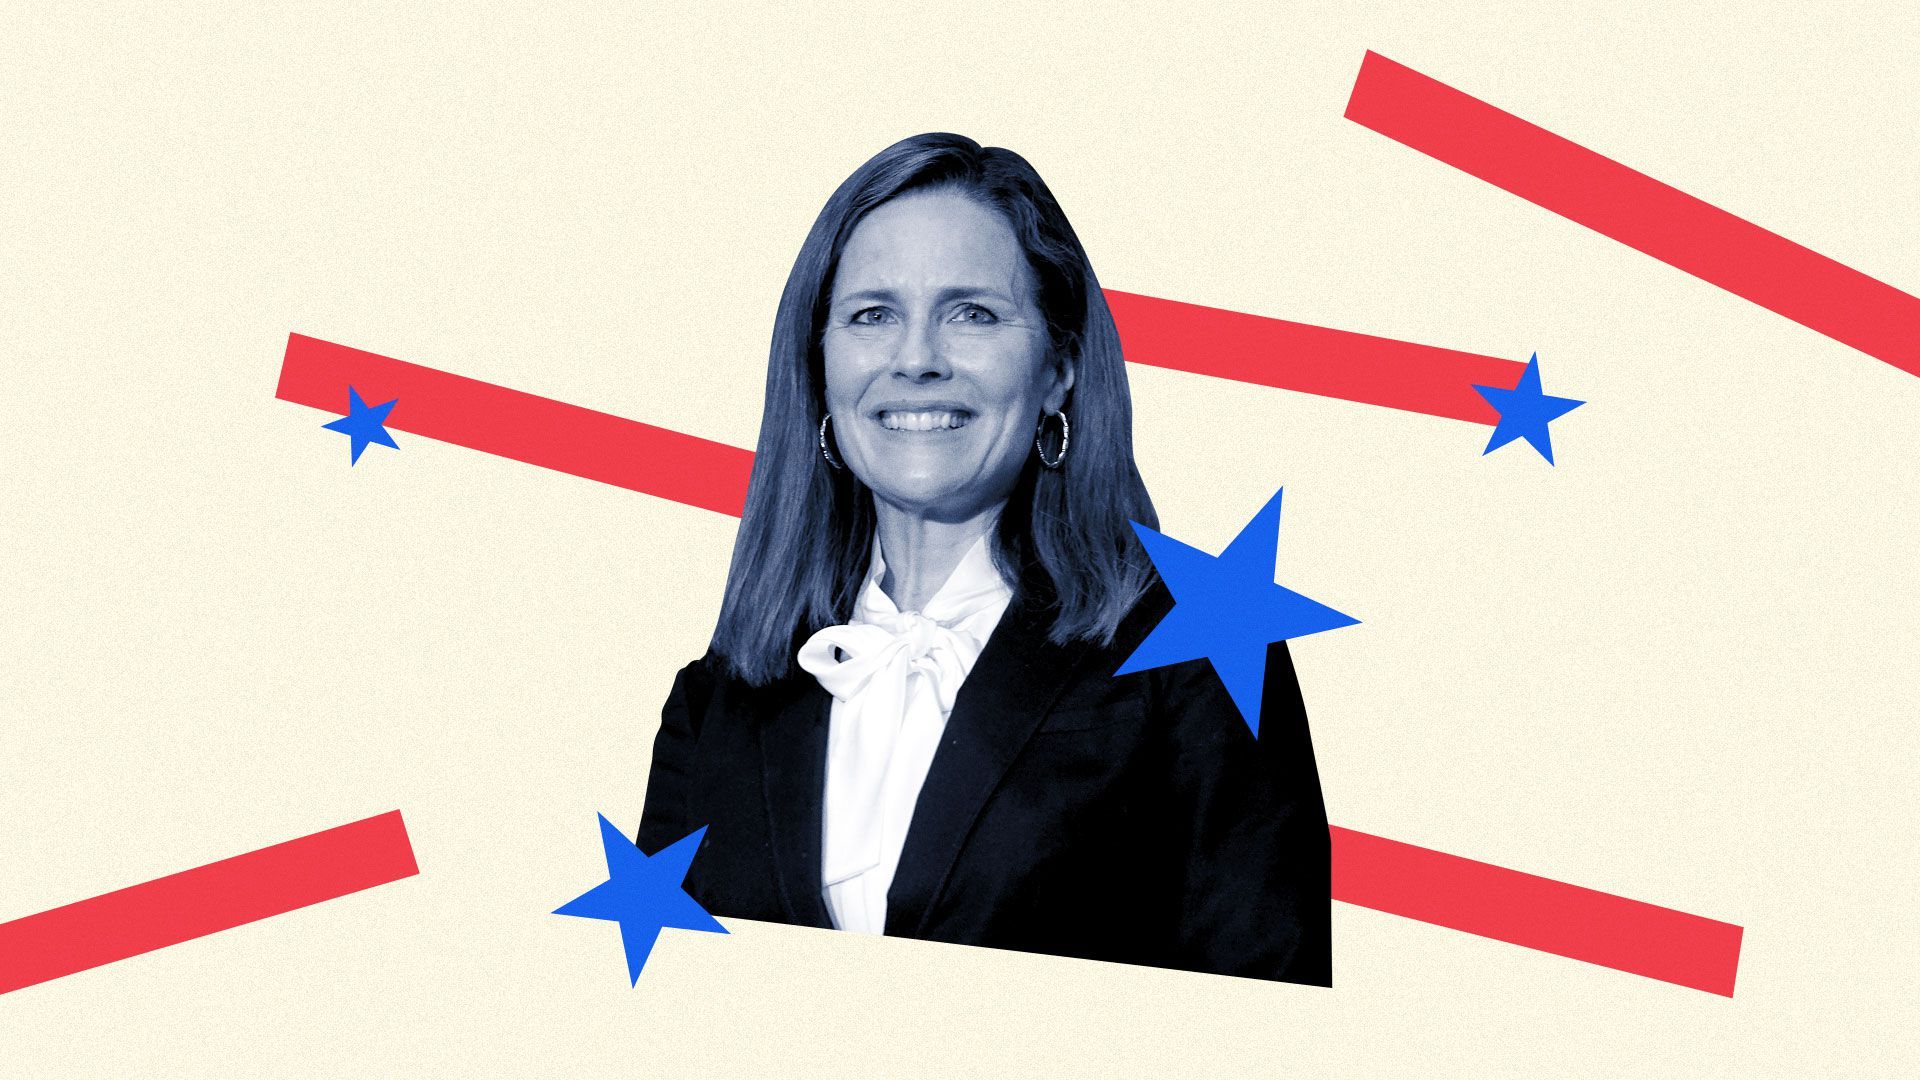 Photo illustration of Amy Coney Barrett with stars and stripes